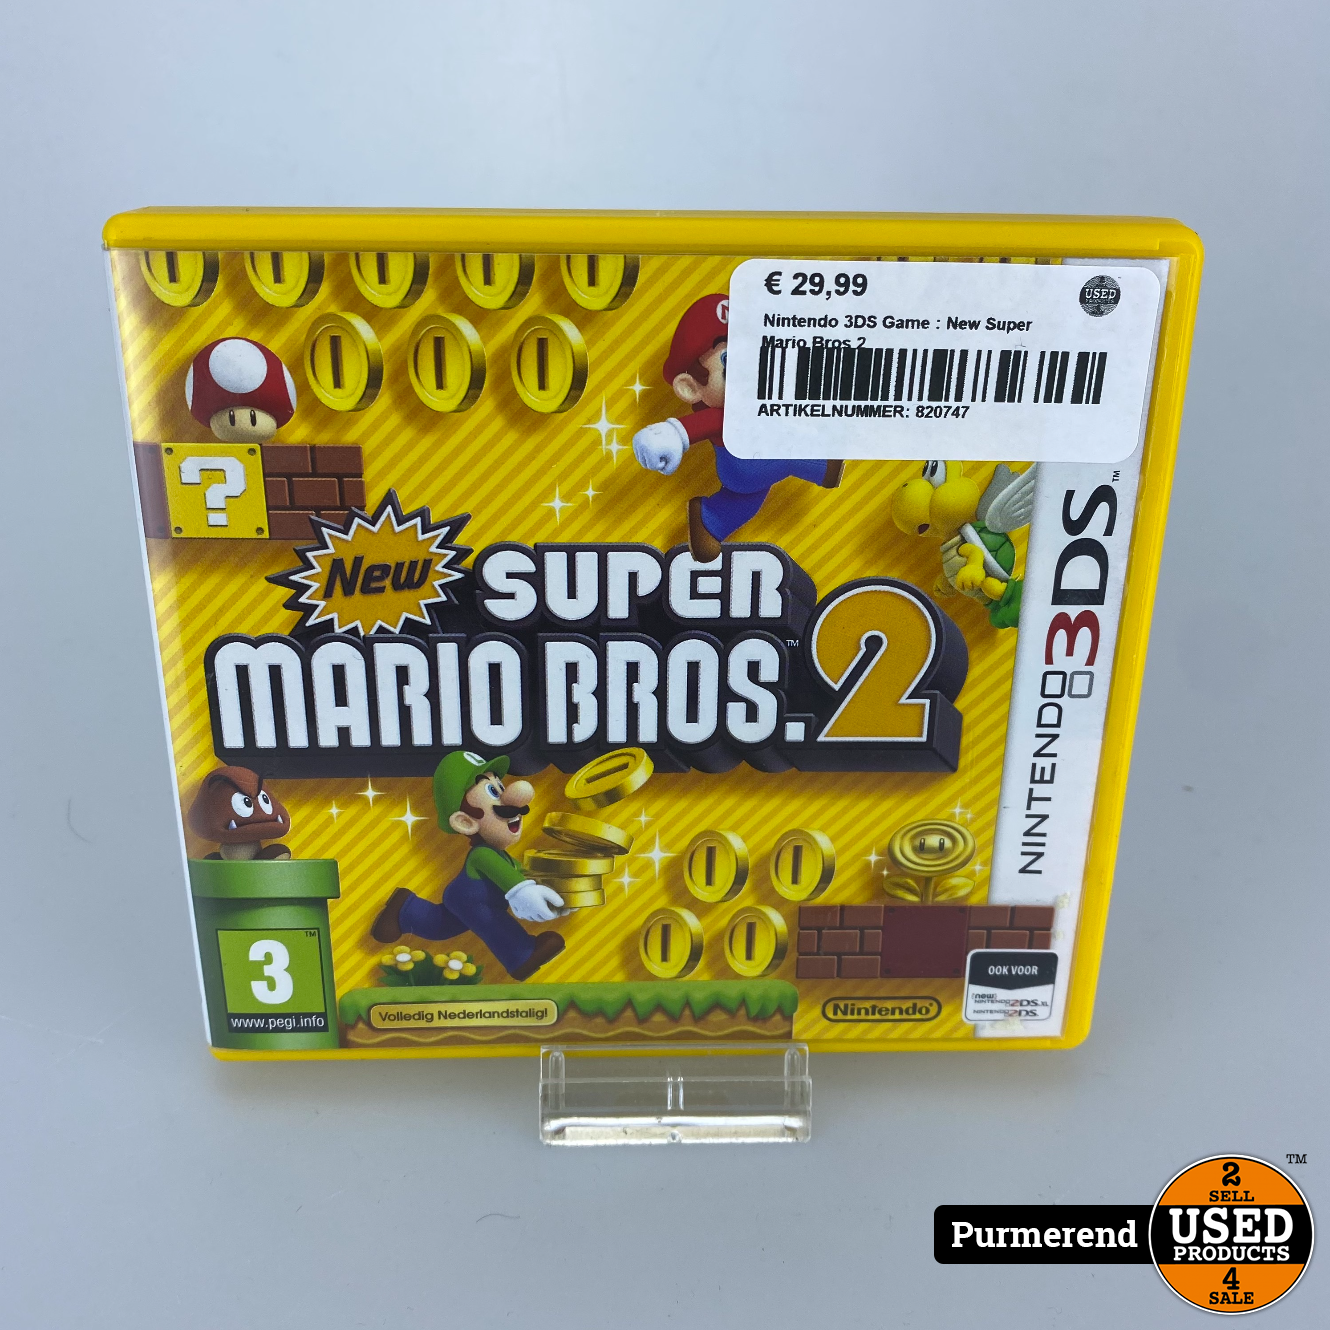 lexicon onthouden Terughoudendheid Nintendo 3DS Game : New Super Mario Bros 2 - Used Products Purmerend